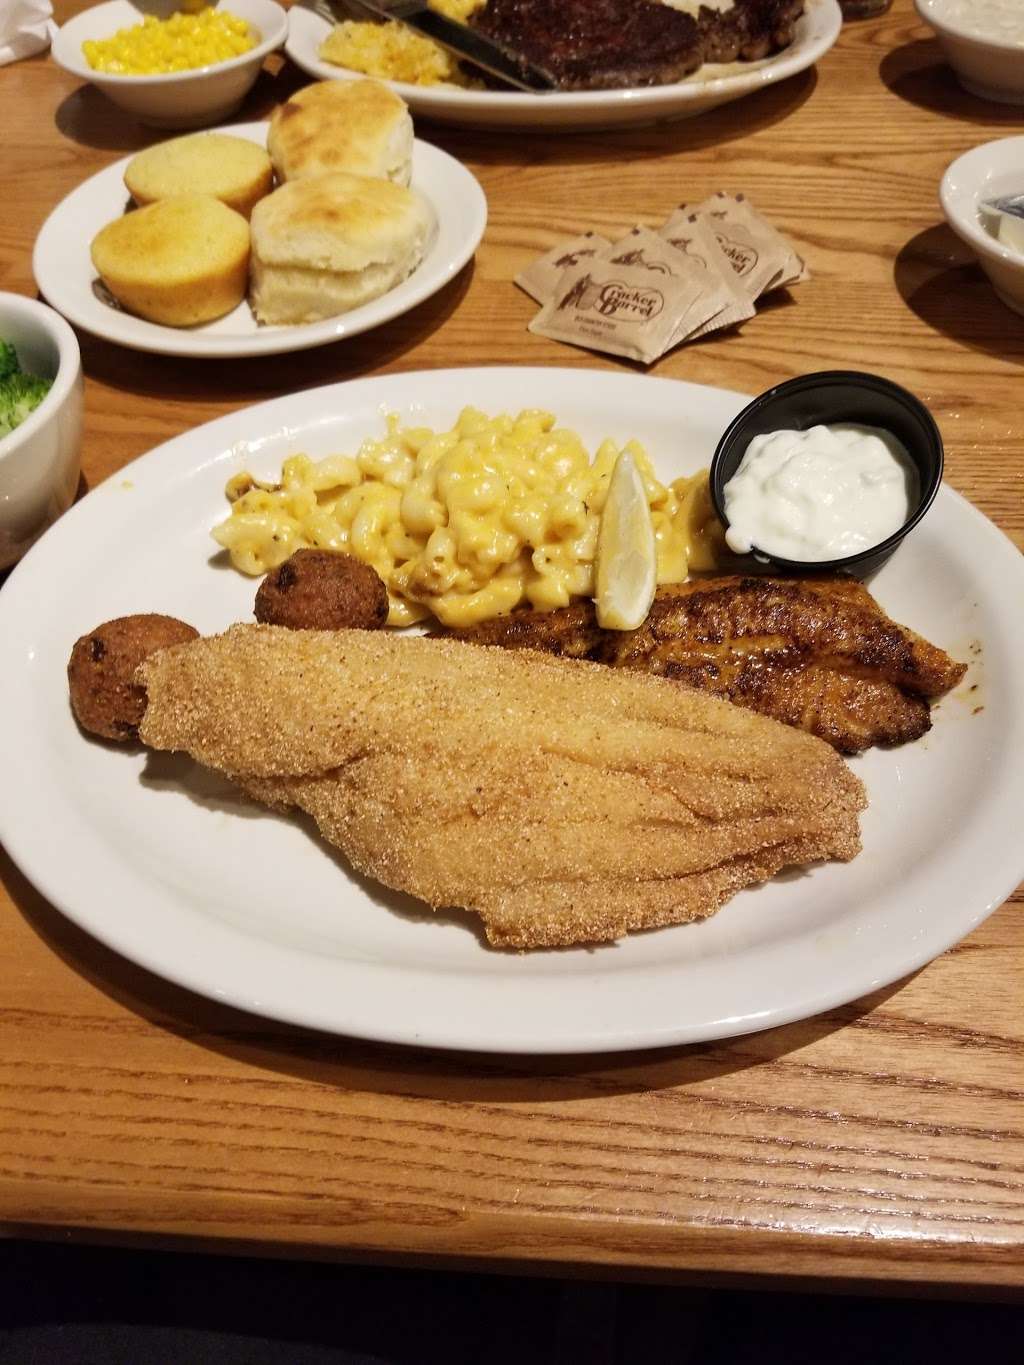 Cracker Barrel Old Country Store | 2095 Gallagher Rd, Plymouth Meeting, PA 19462 | Phone: (610) 828-2221